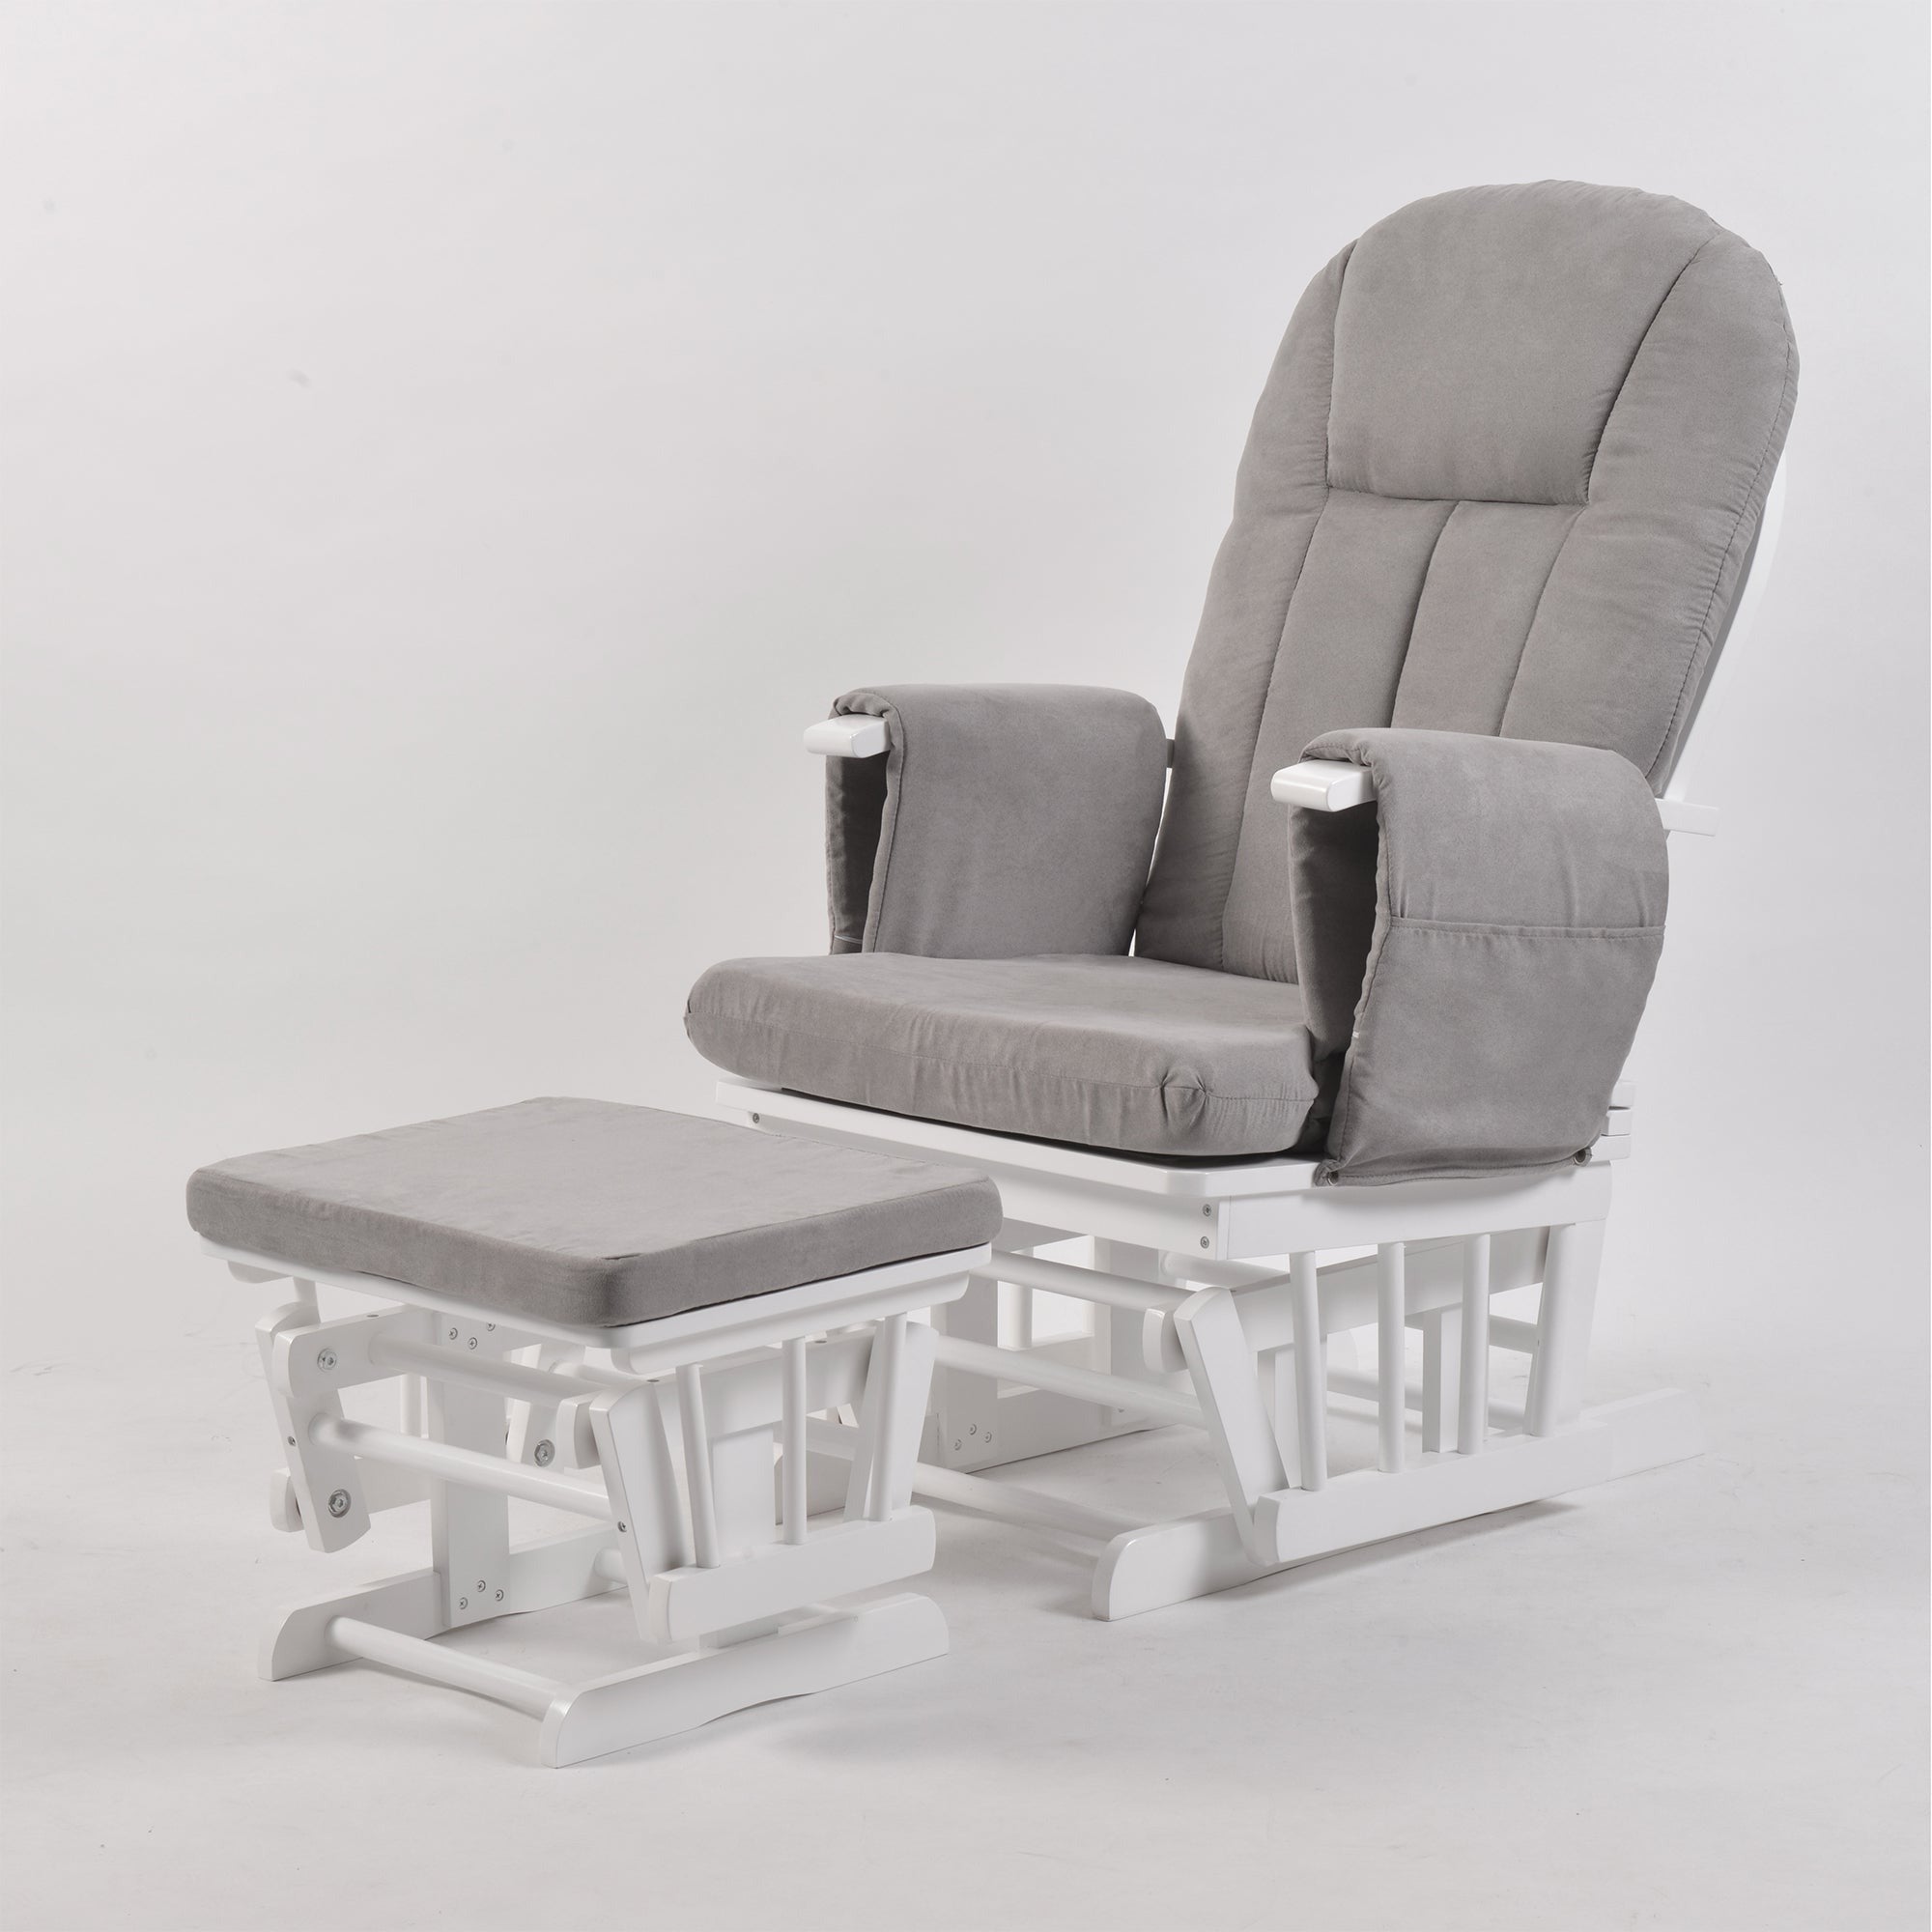 Nursing Chair and Footstool - Mothercare Best Seller - White/Grey